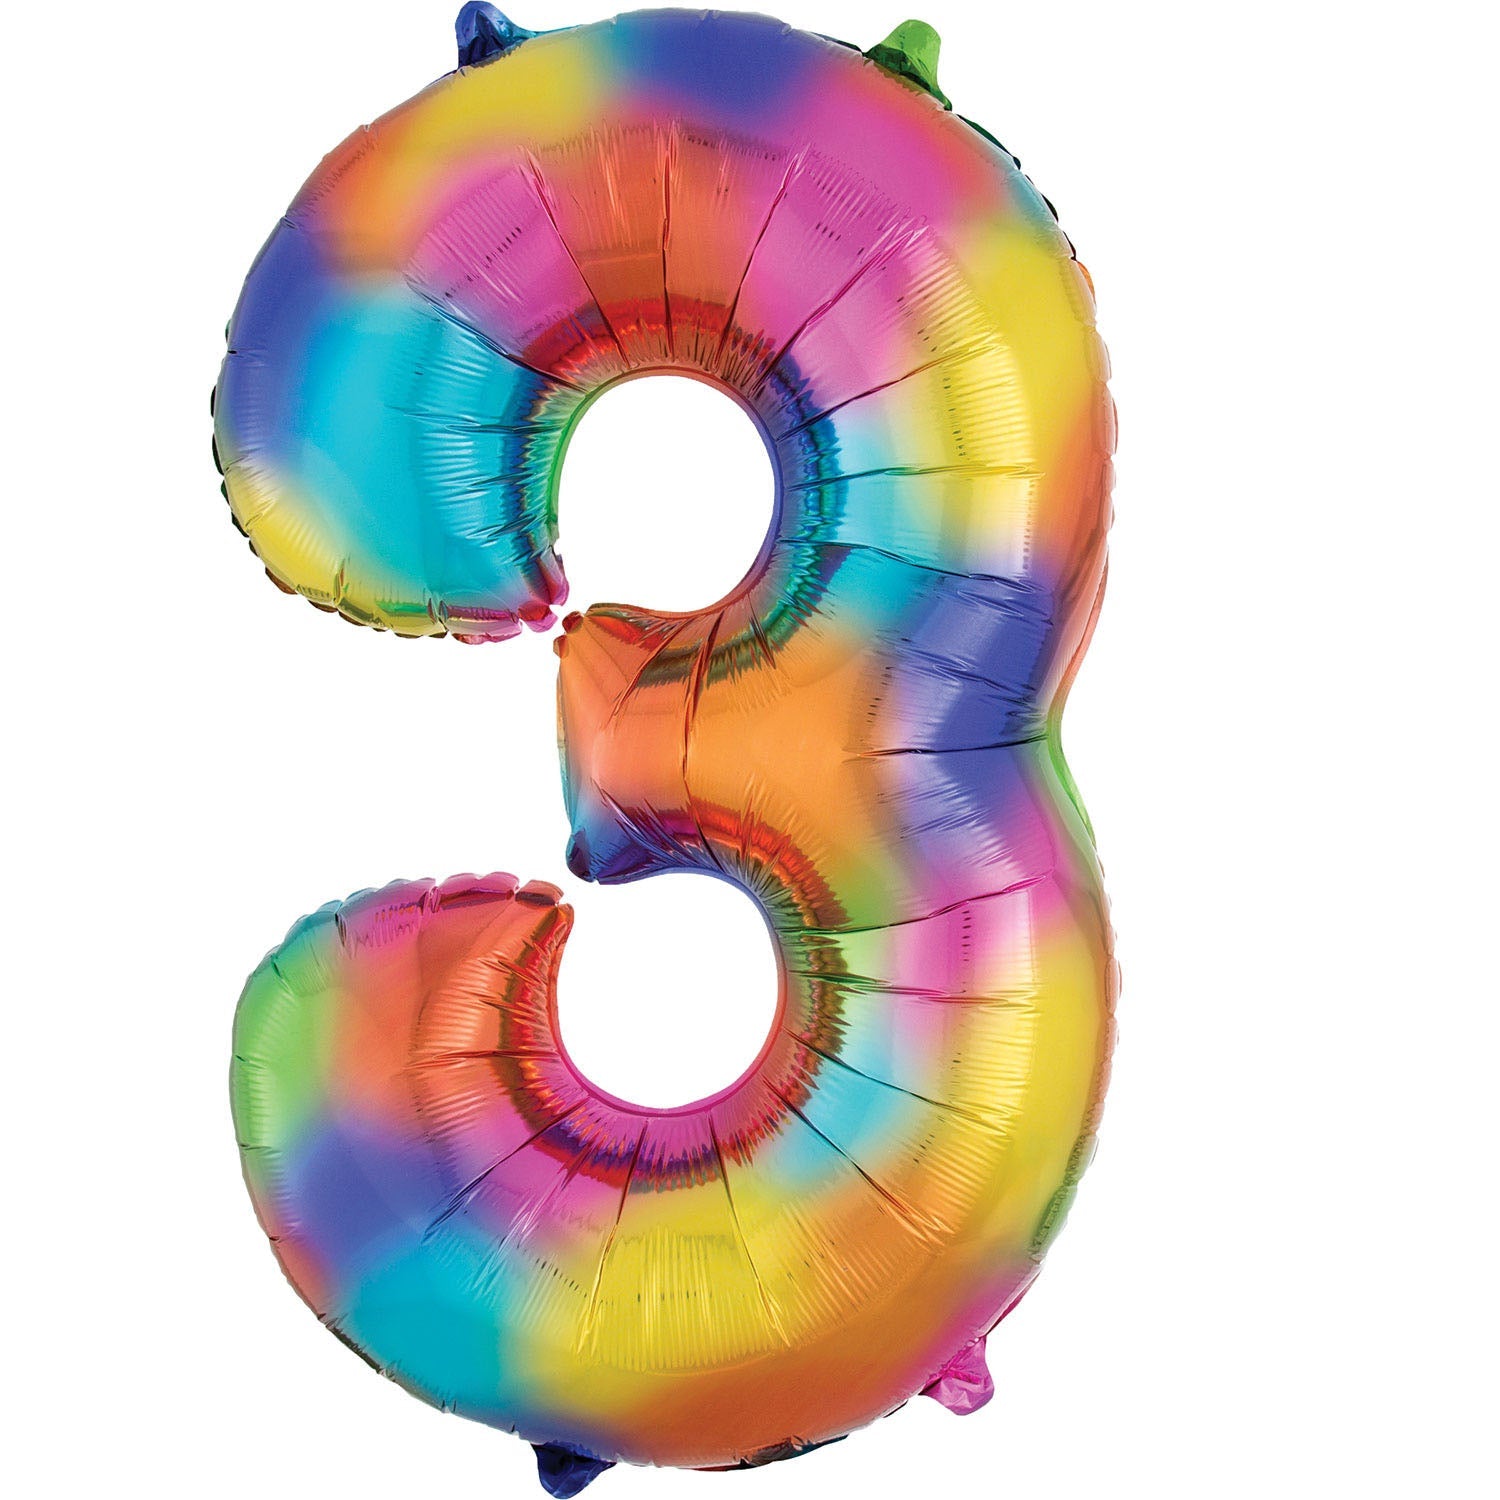 Rainbow Splash Supershape Number 3 Foil Balloon 86cm (34in) height by 50cm (20in) width Balloon is sold uninflated. Can be inflated with air or helium.